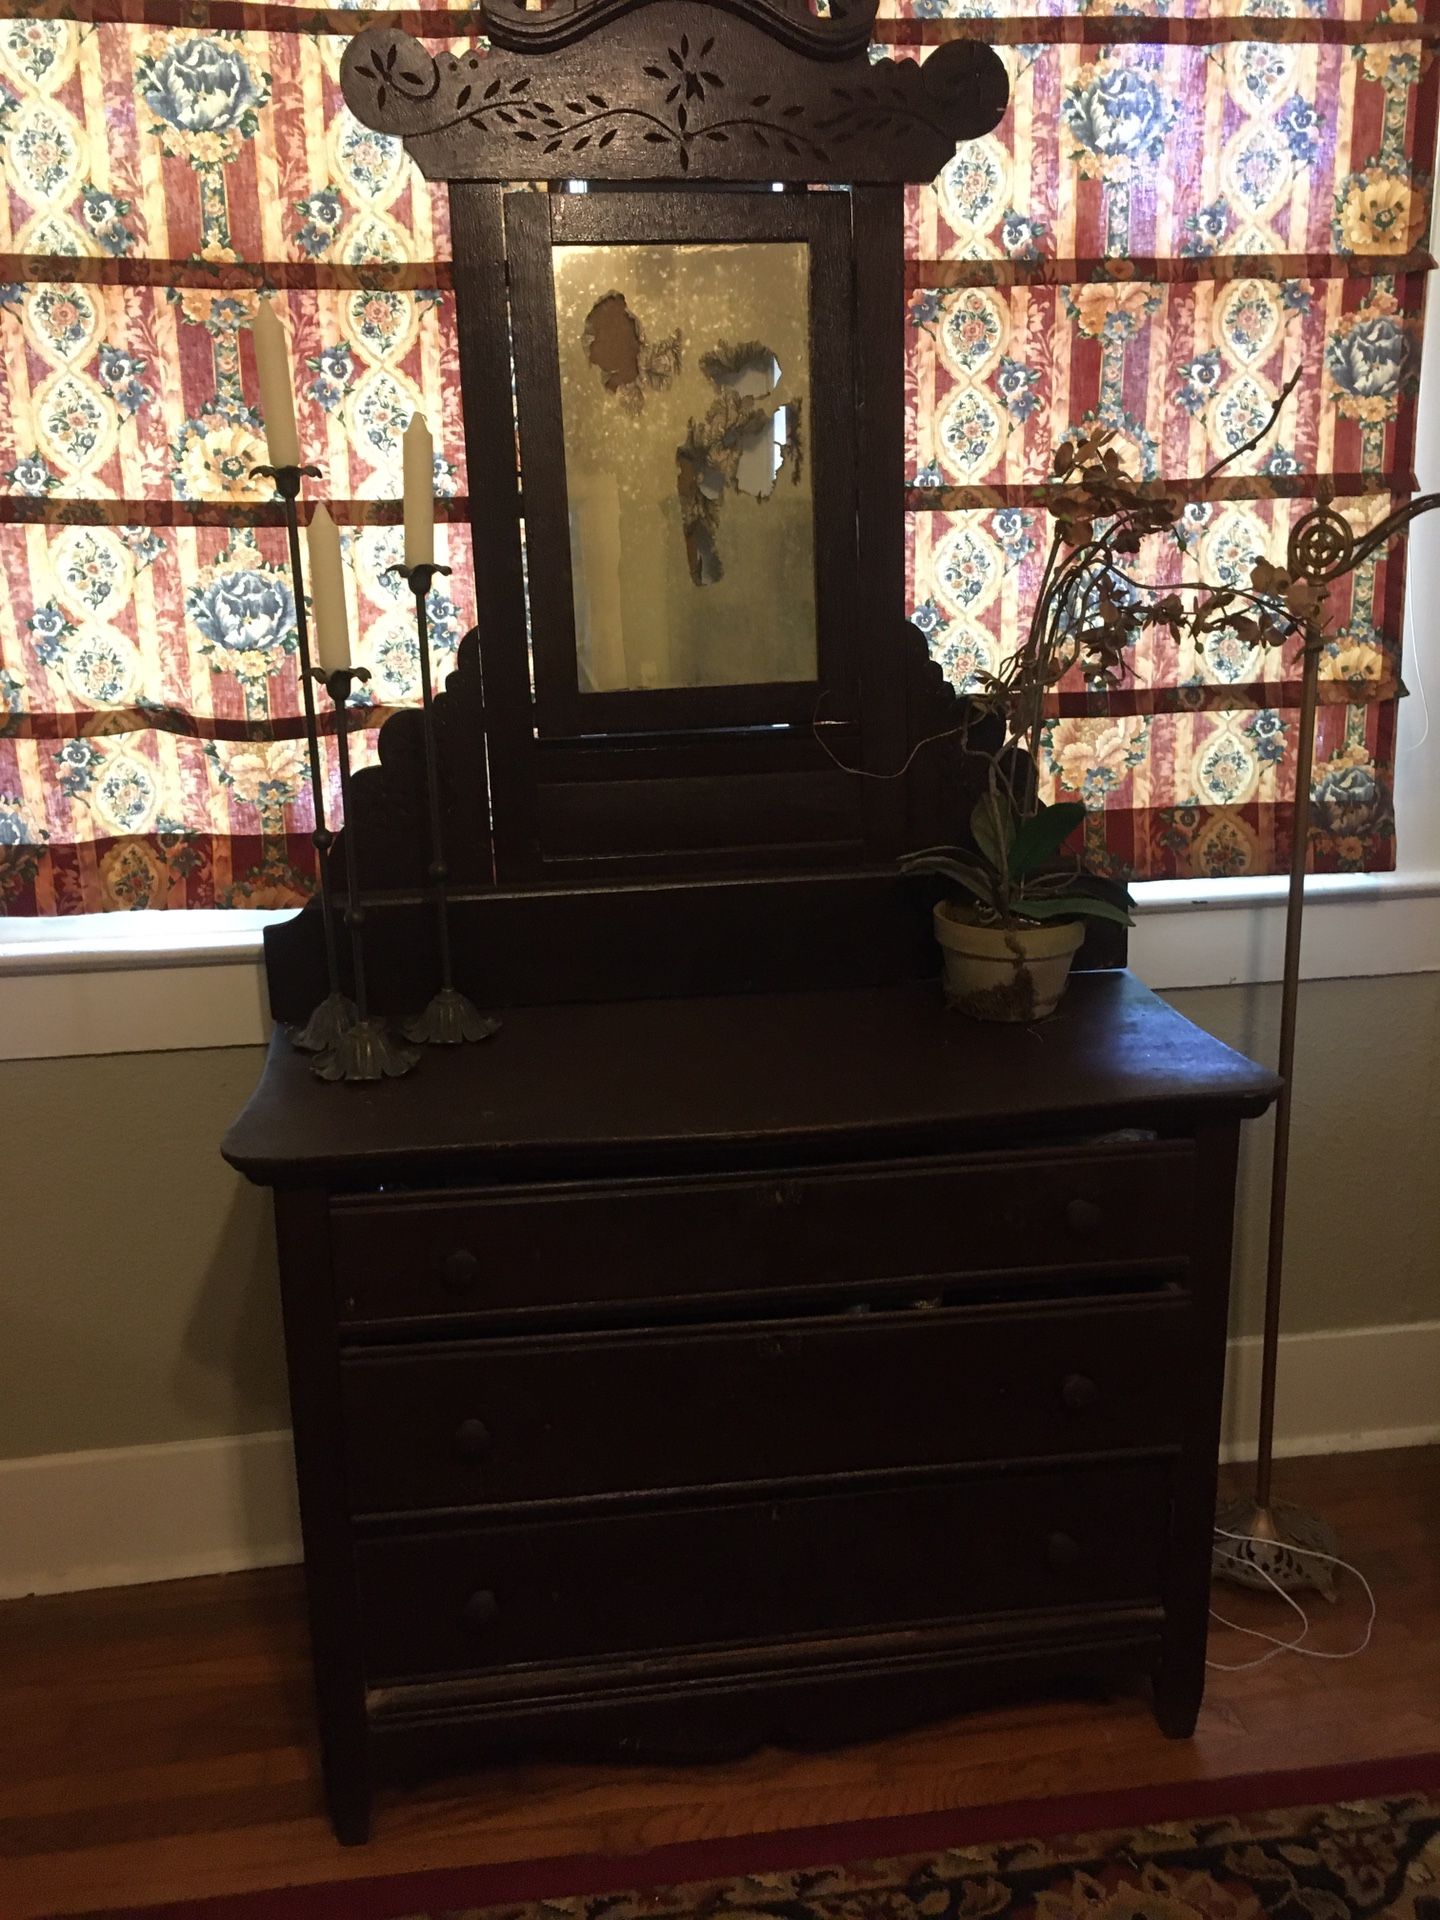 Antique chest with a mirror